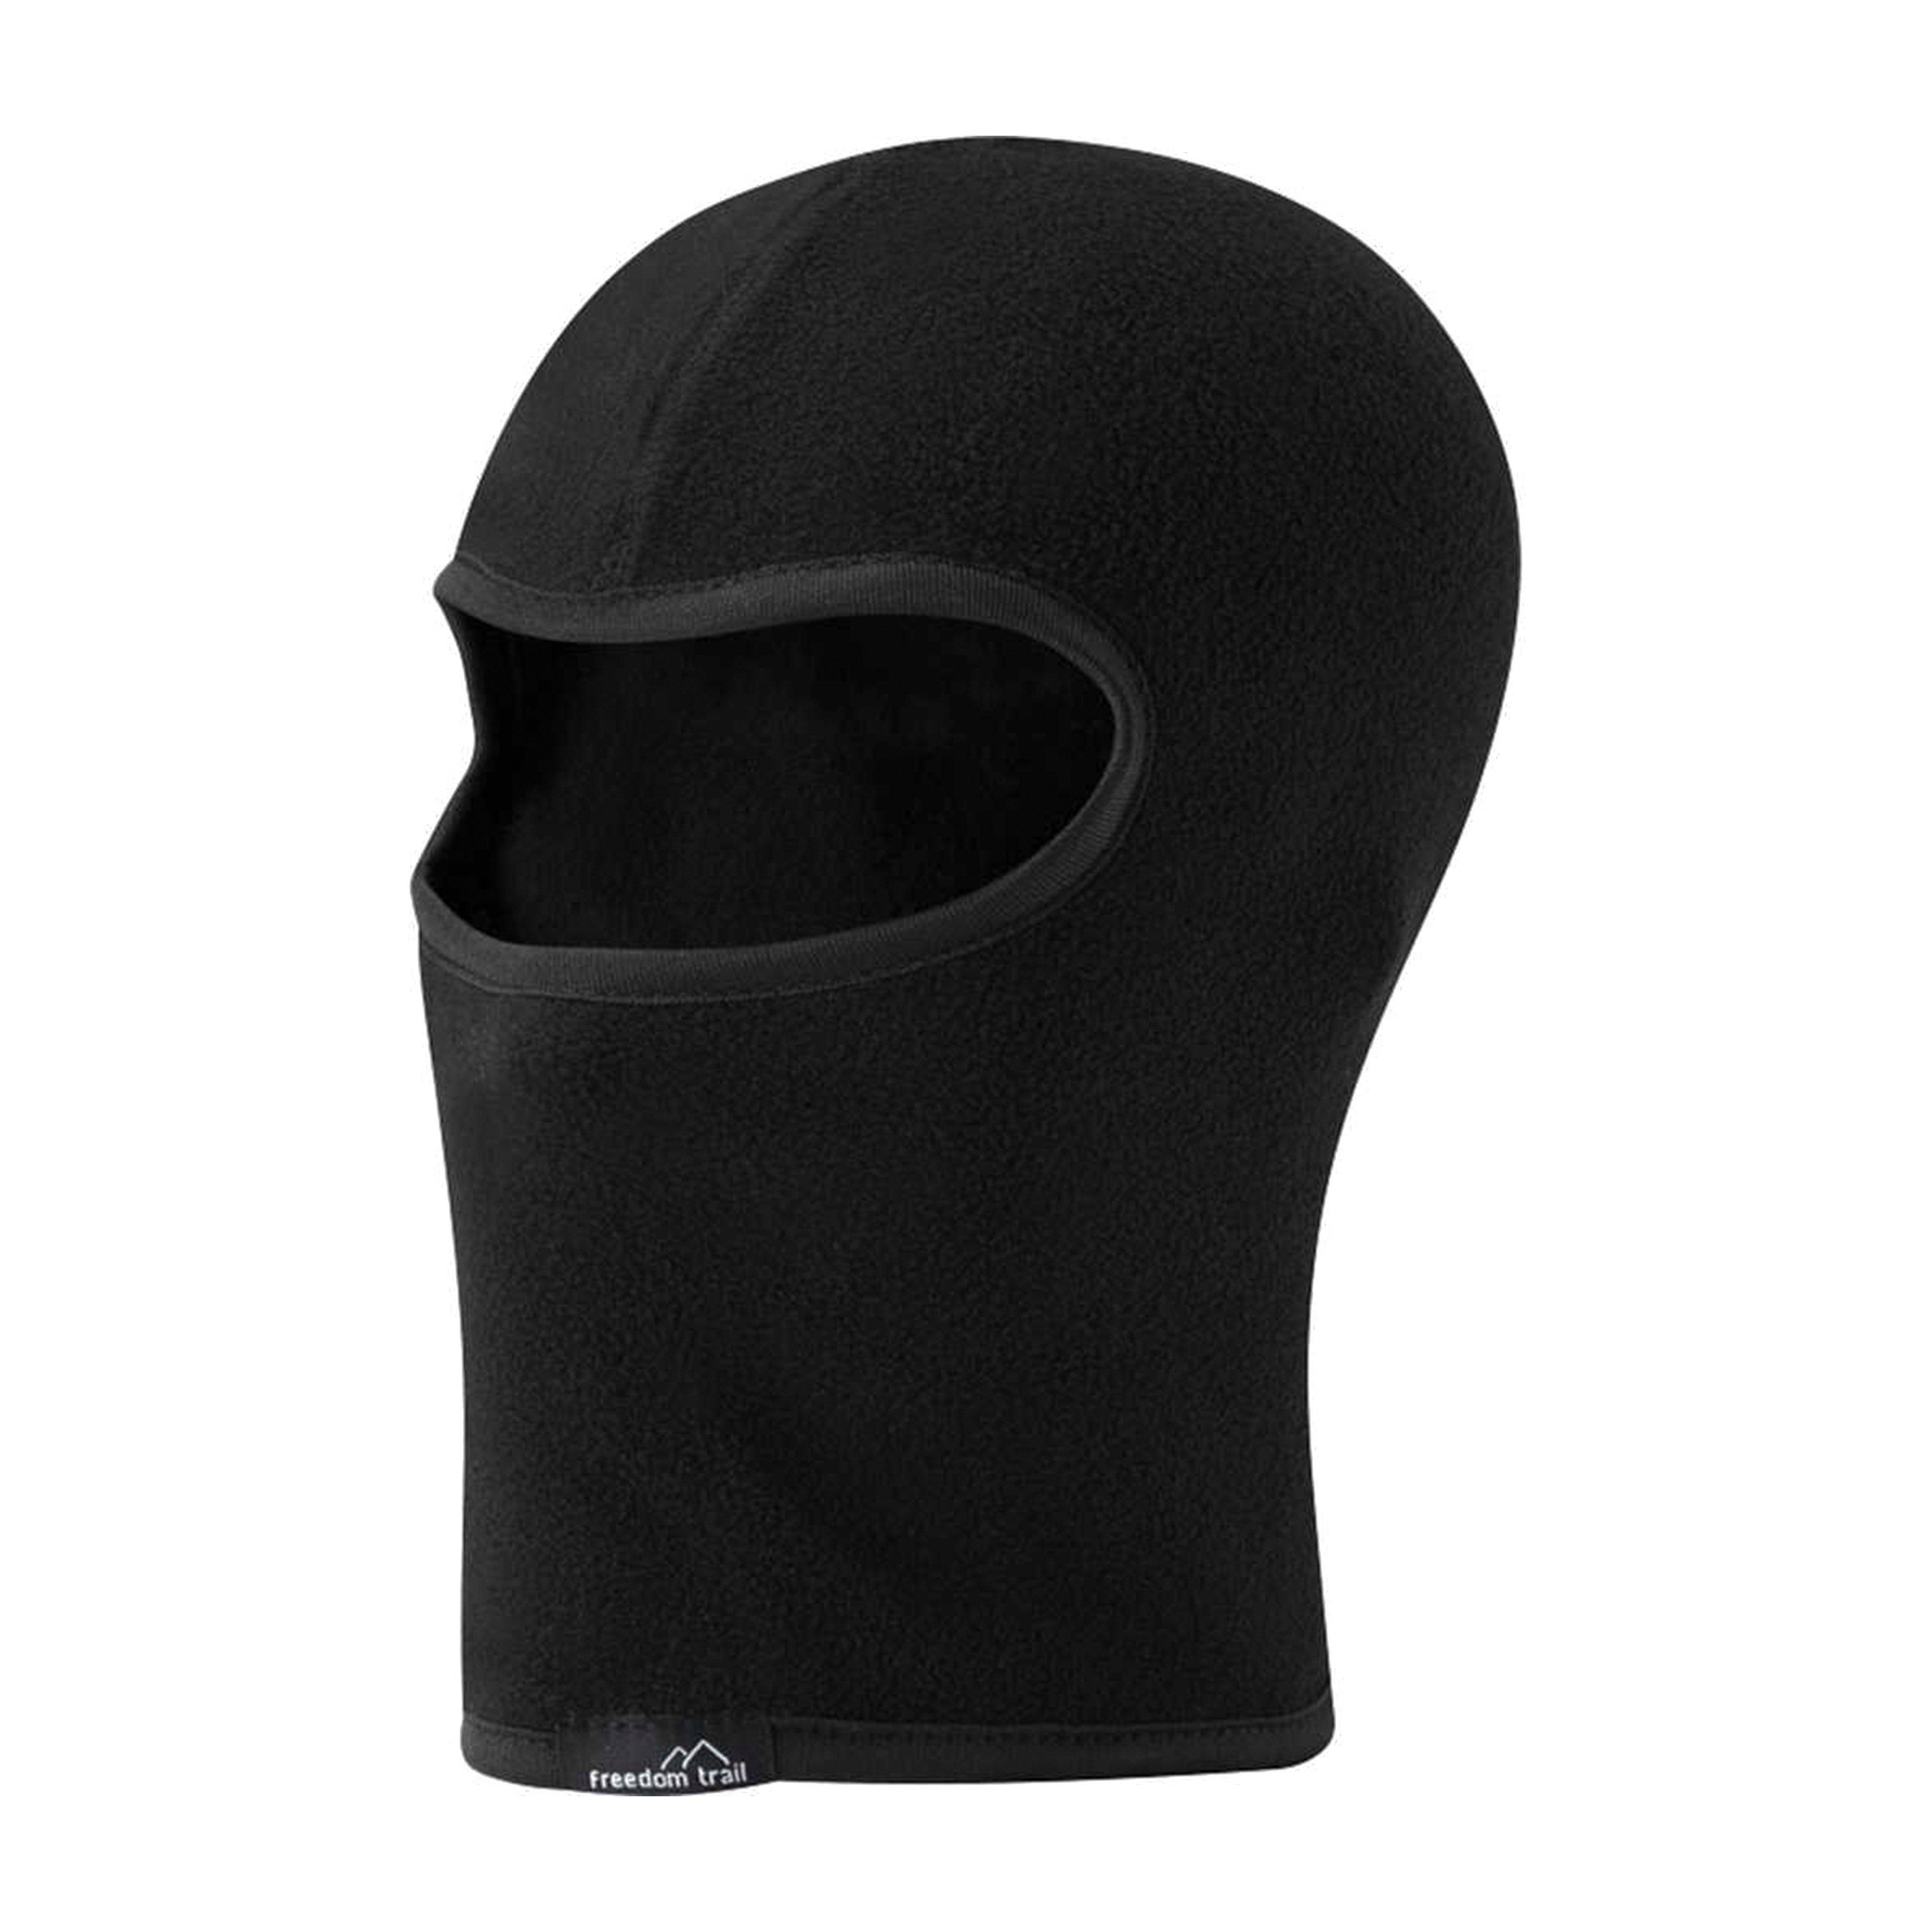 FreedomTrail Kids' Essential Balaclava Review